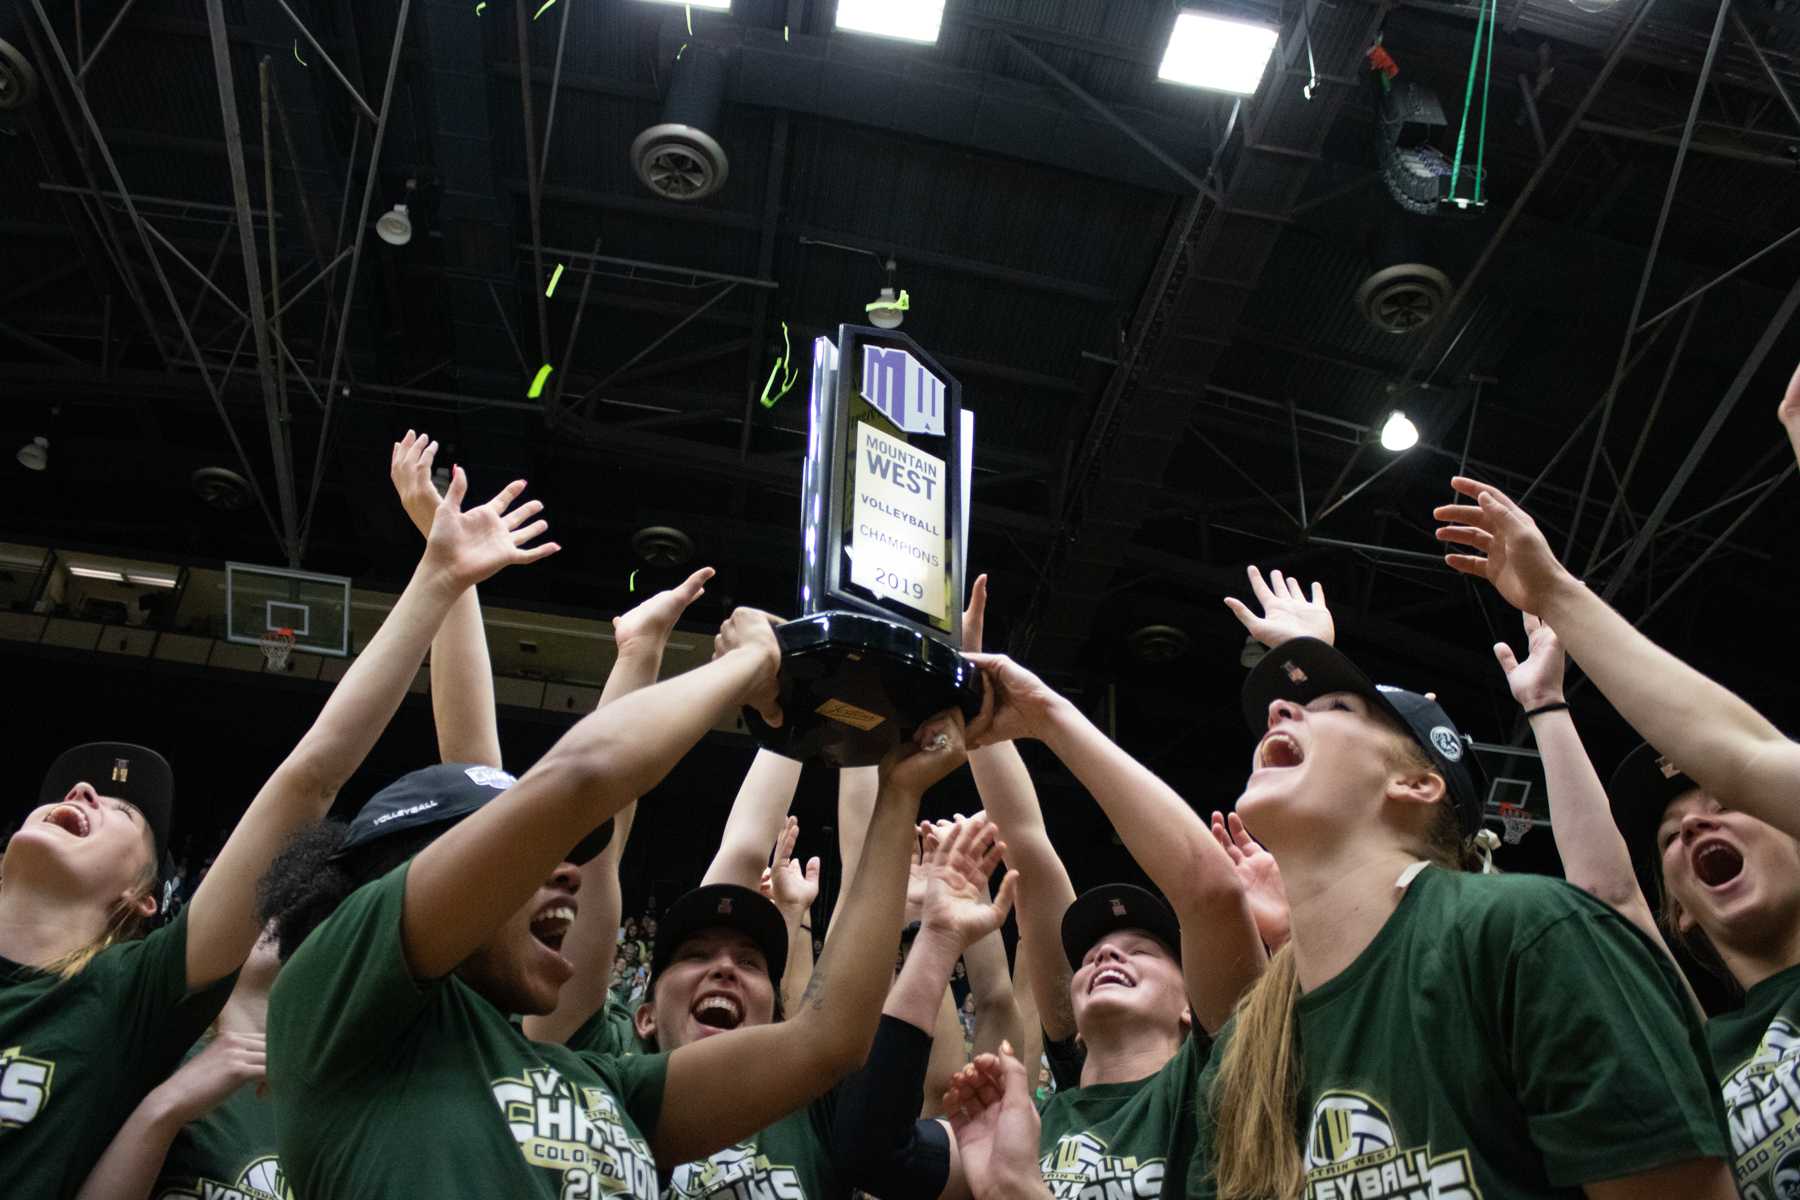 Past+Photos%3A+Volleyball+Mountain+West+Championship